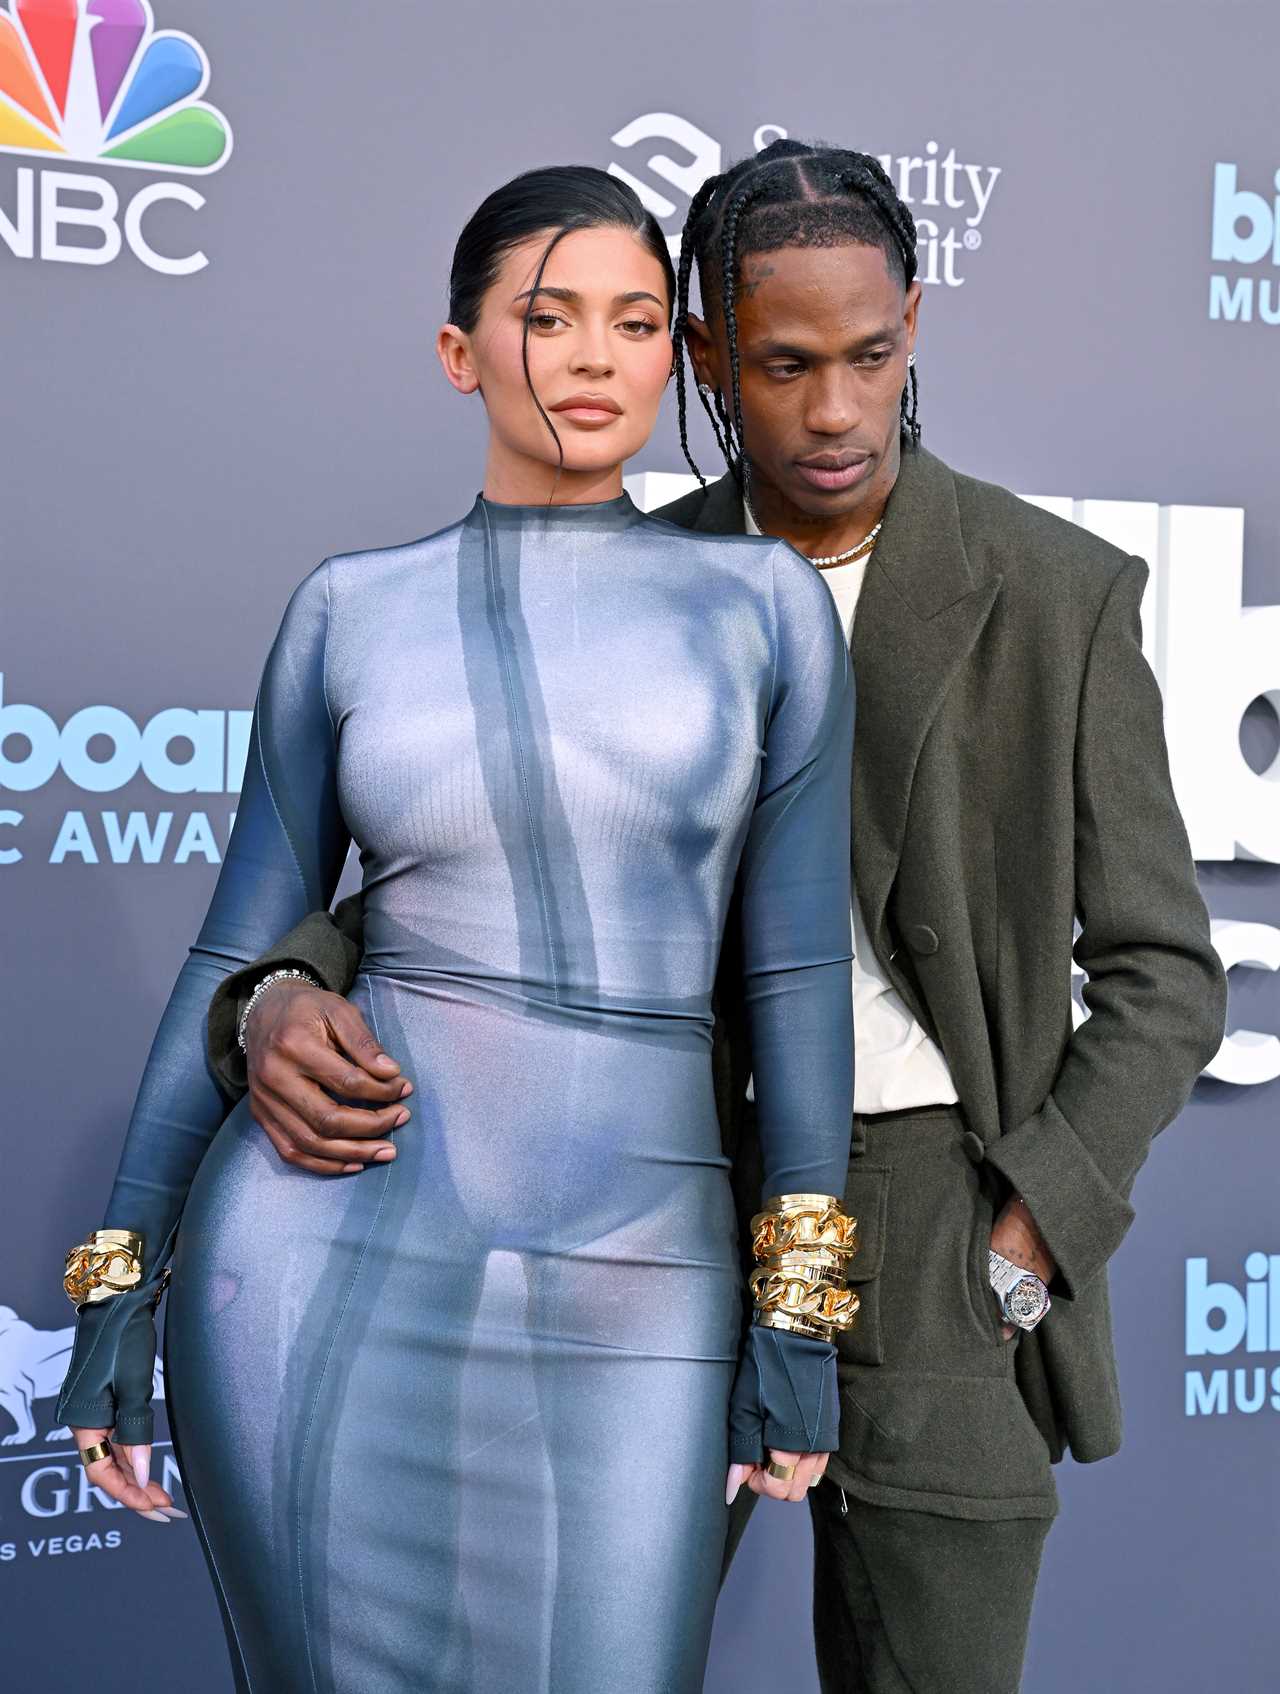 Kylie Jenner posts then deletes Instagram photo of ex Travis Scott as fans think she’s ‘really hurt’ over split